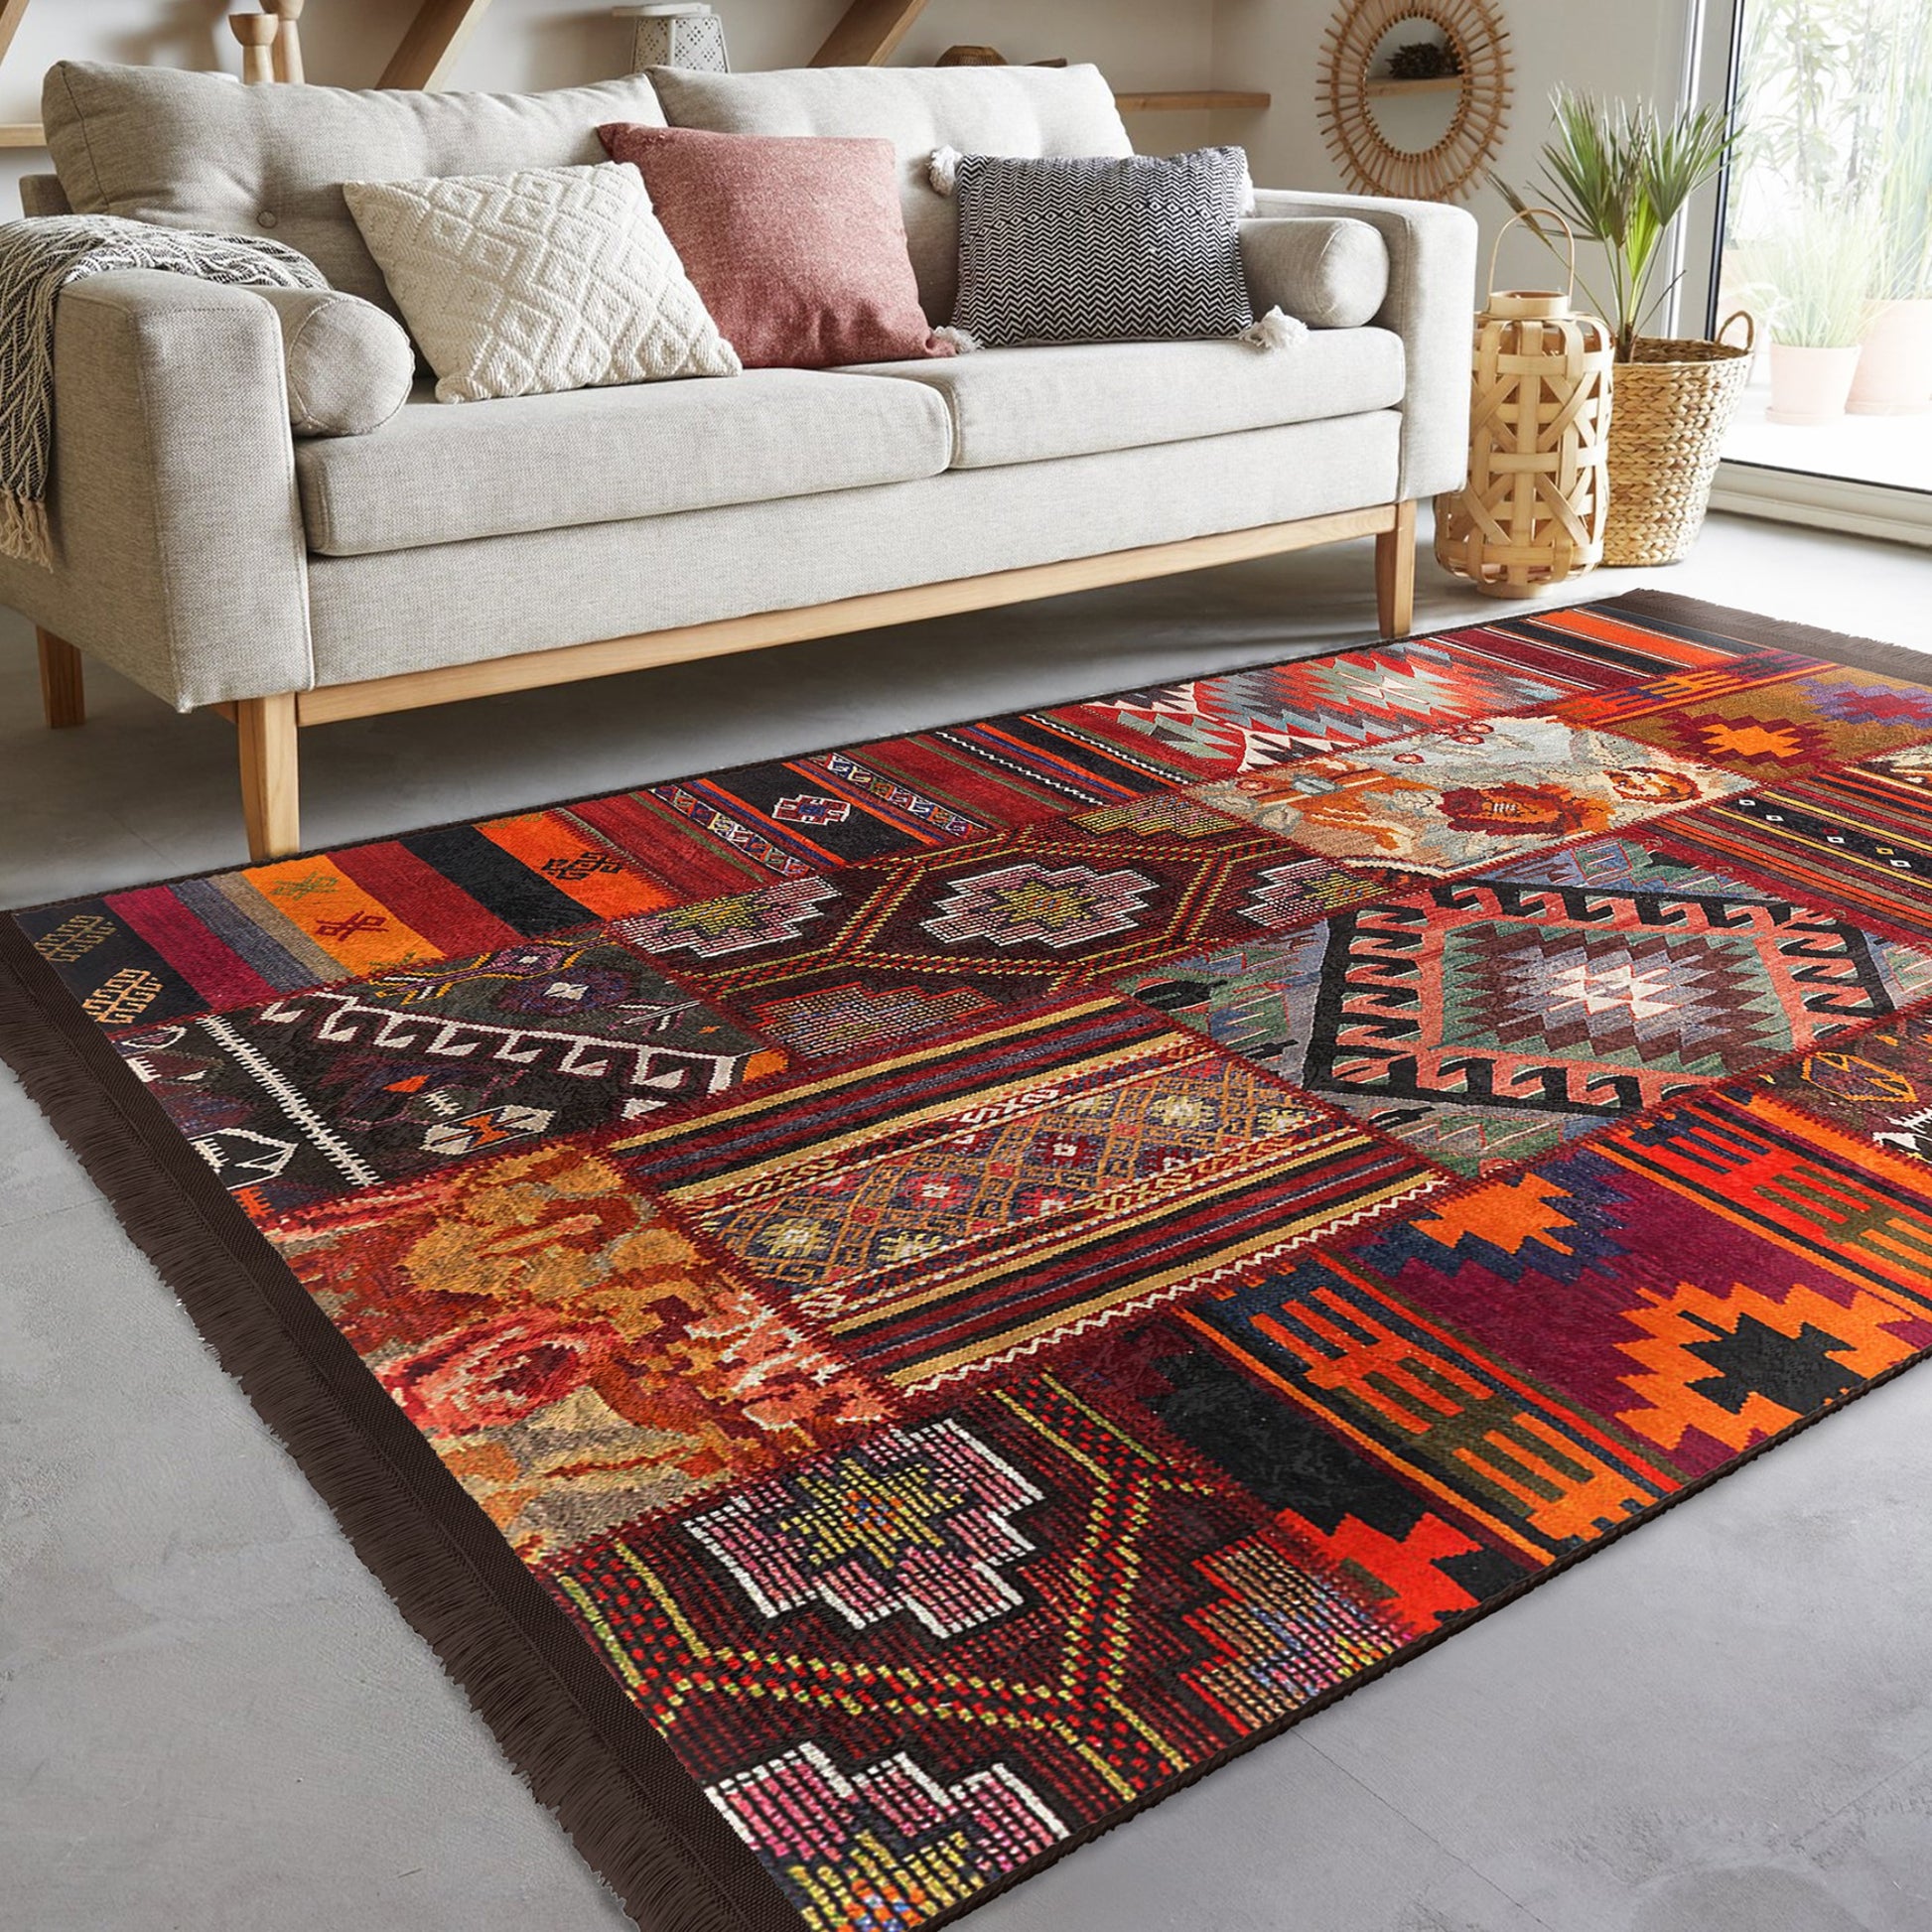 Decorative Area Rug with a Rich Cultural Heritage